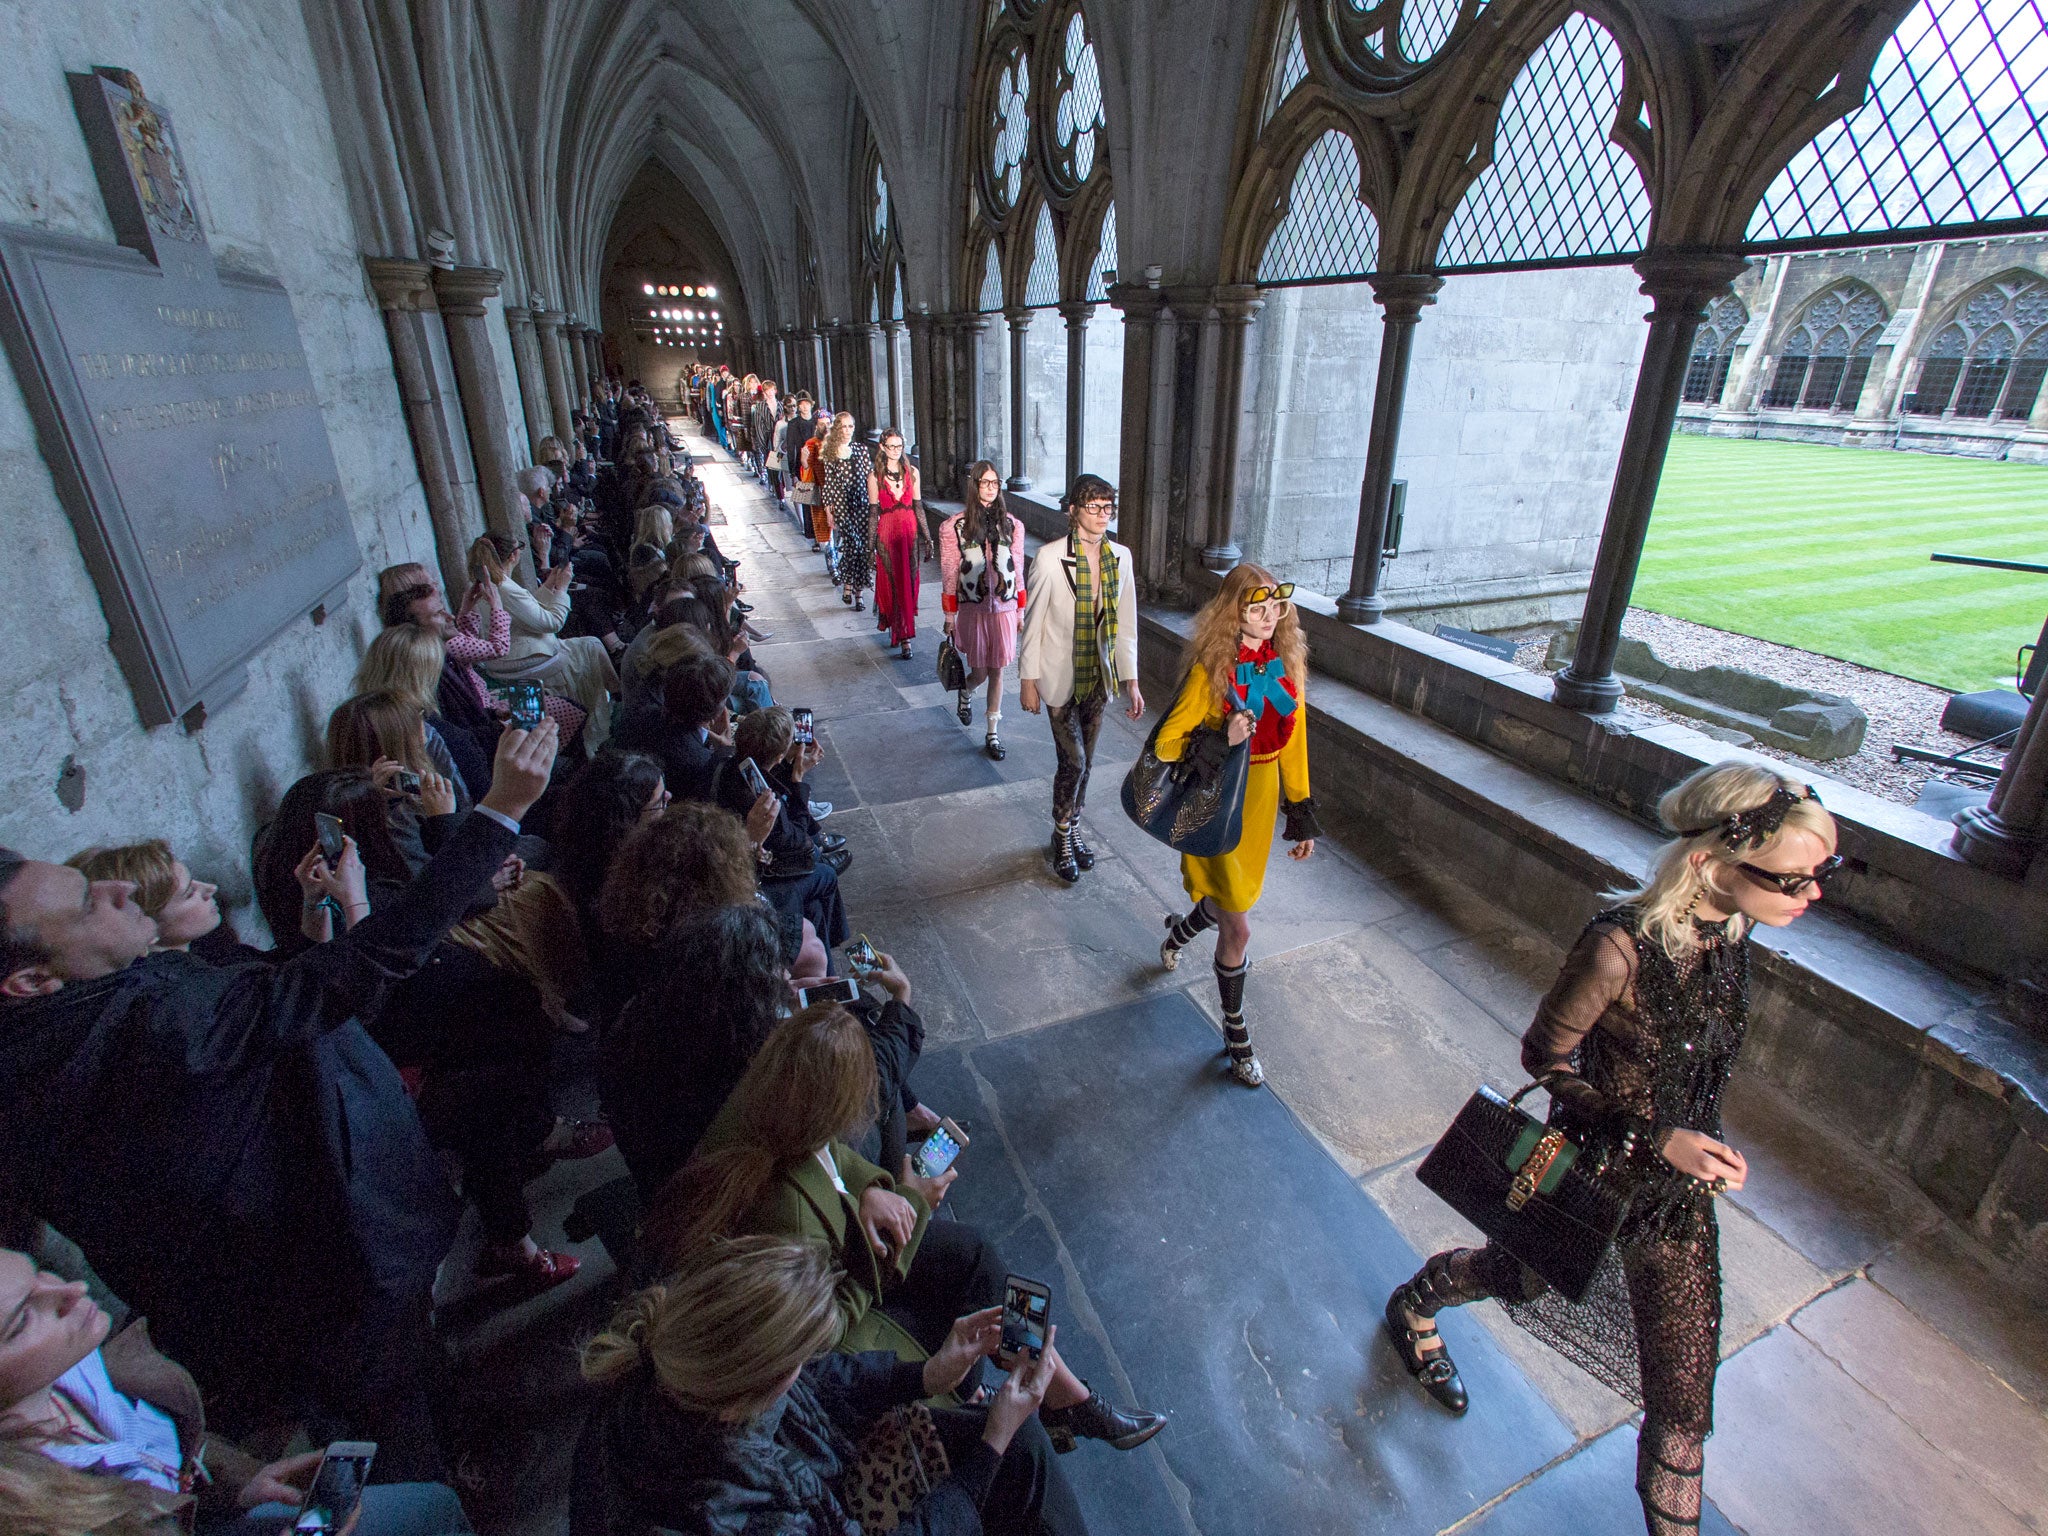 Models parade through the cloisters of Westminster Abbey for Gucci's latest Cruise show